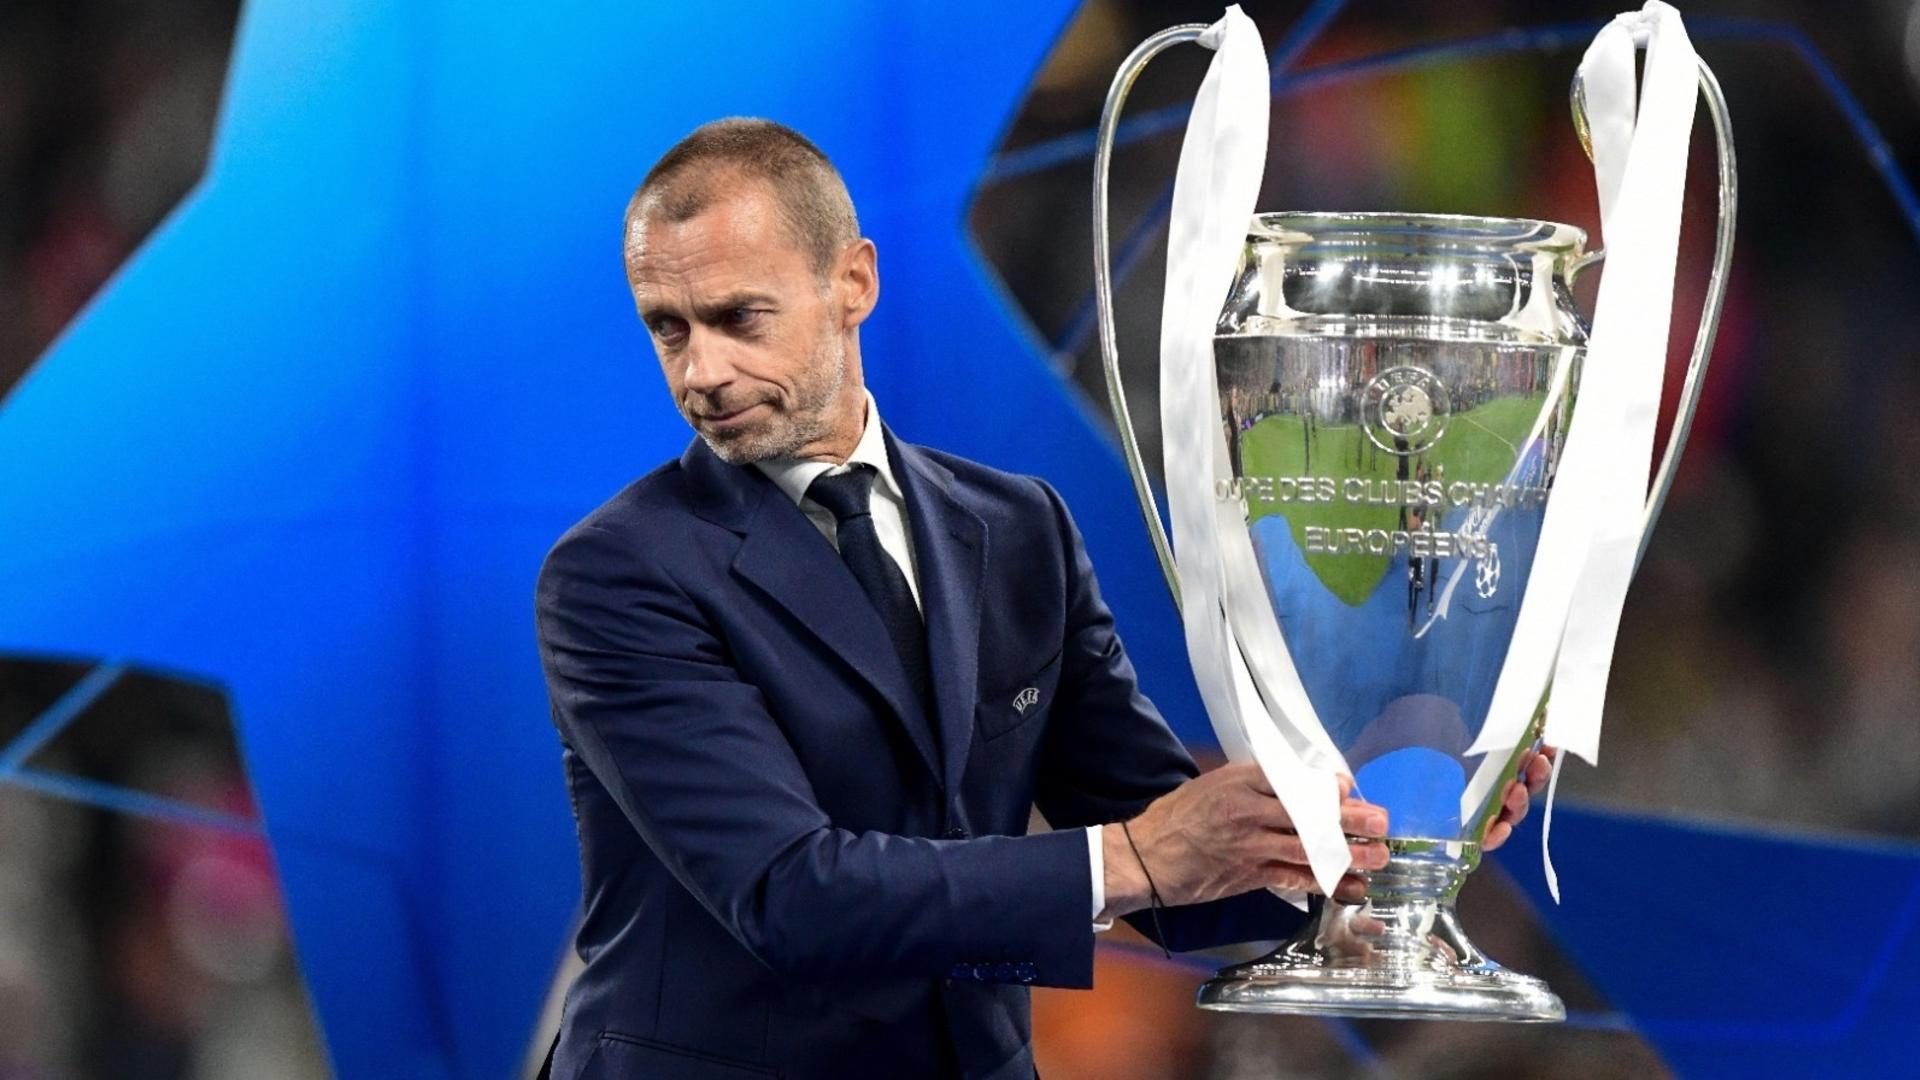 Champions League 2023/24 draw: When it is, where to watch on TV